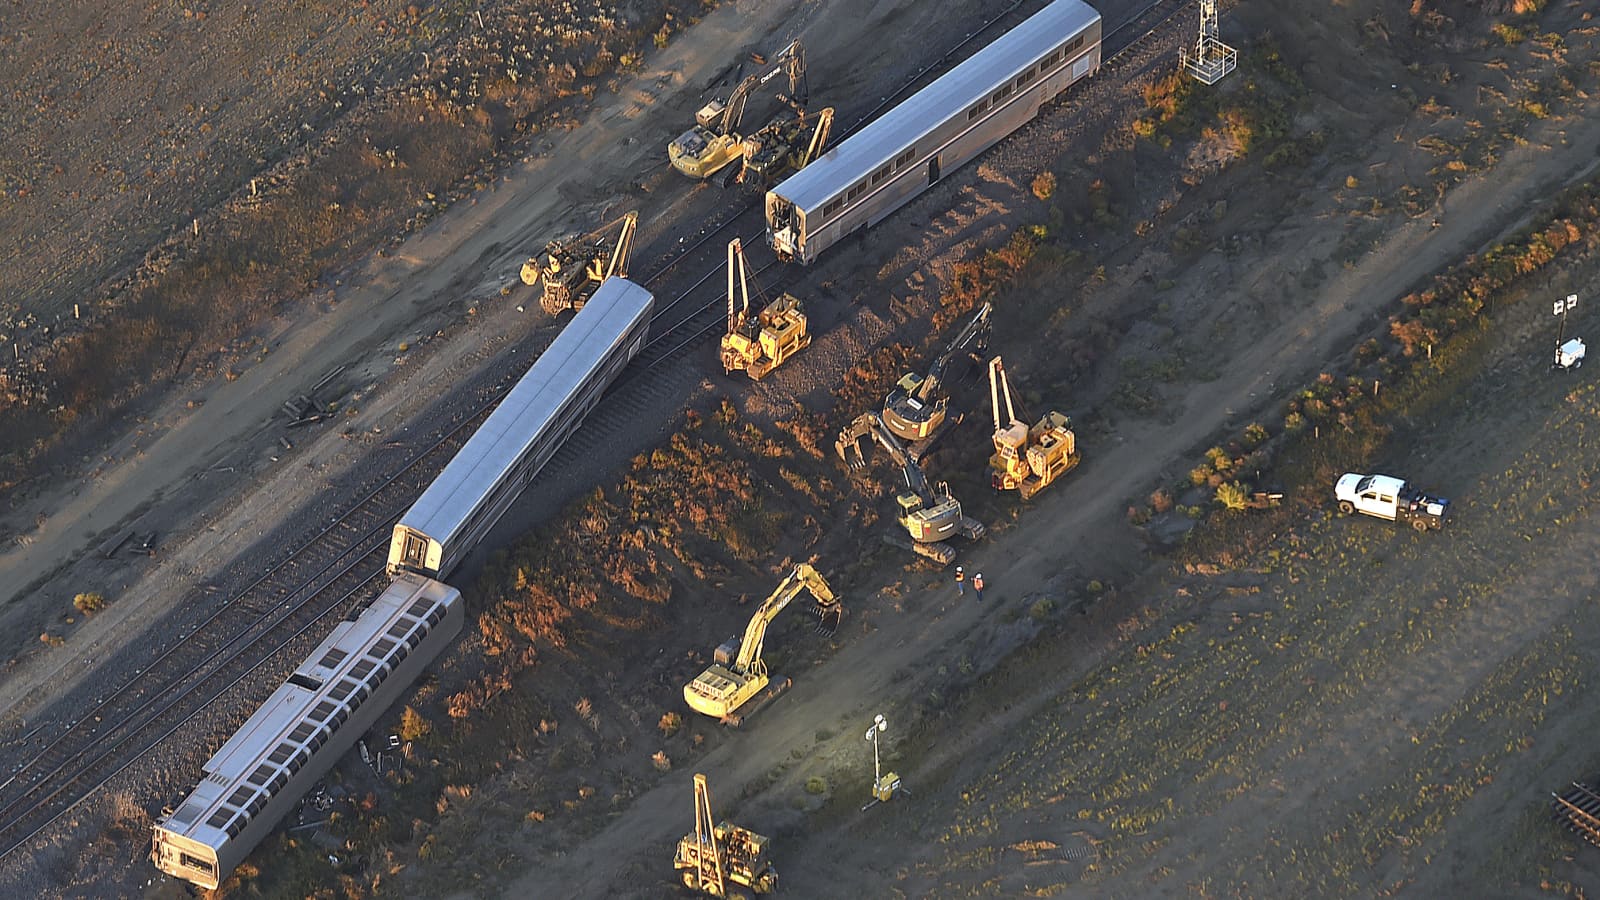 At Least 3 People Killed in Amtrak Derailment in Montana